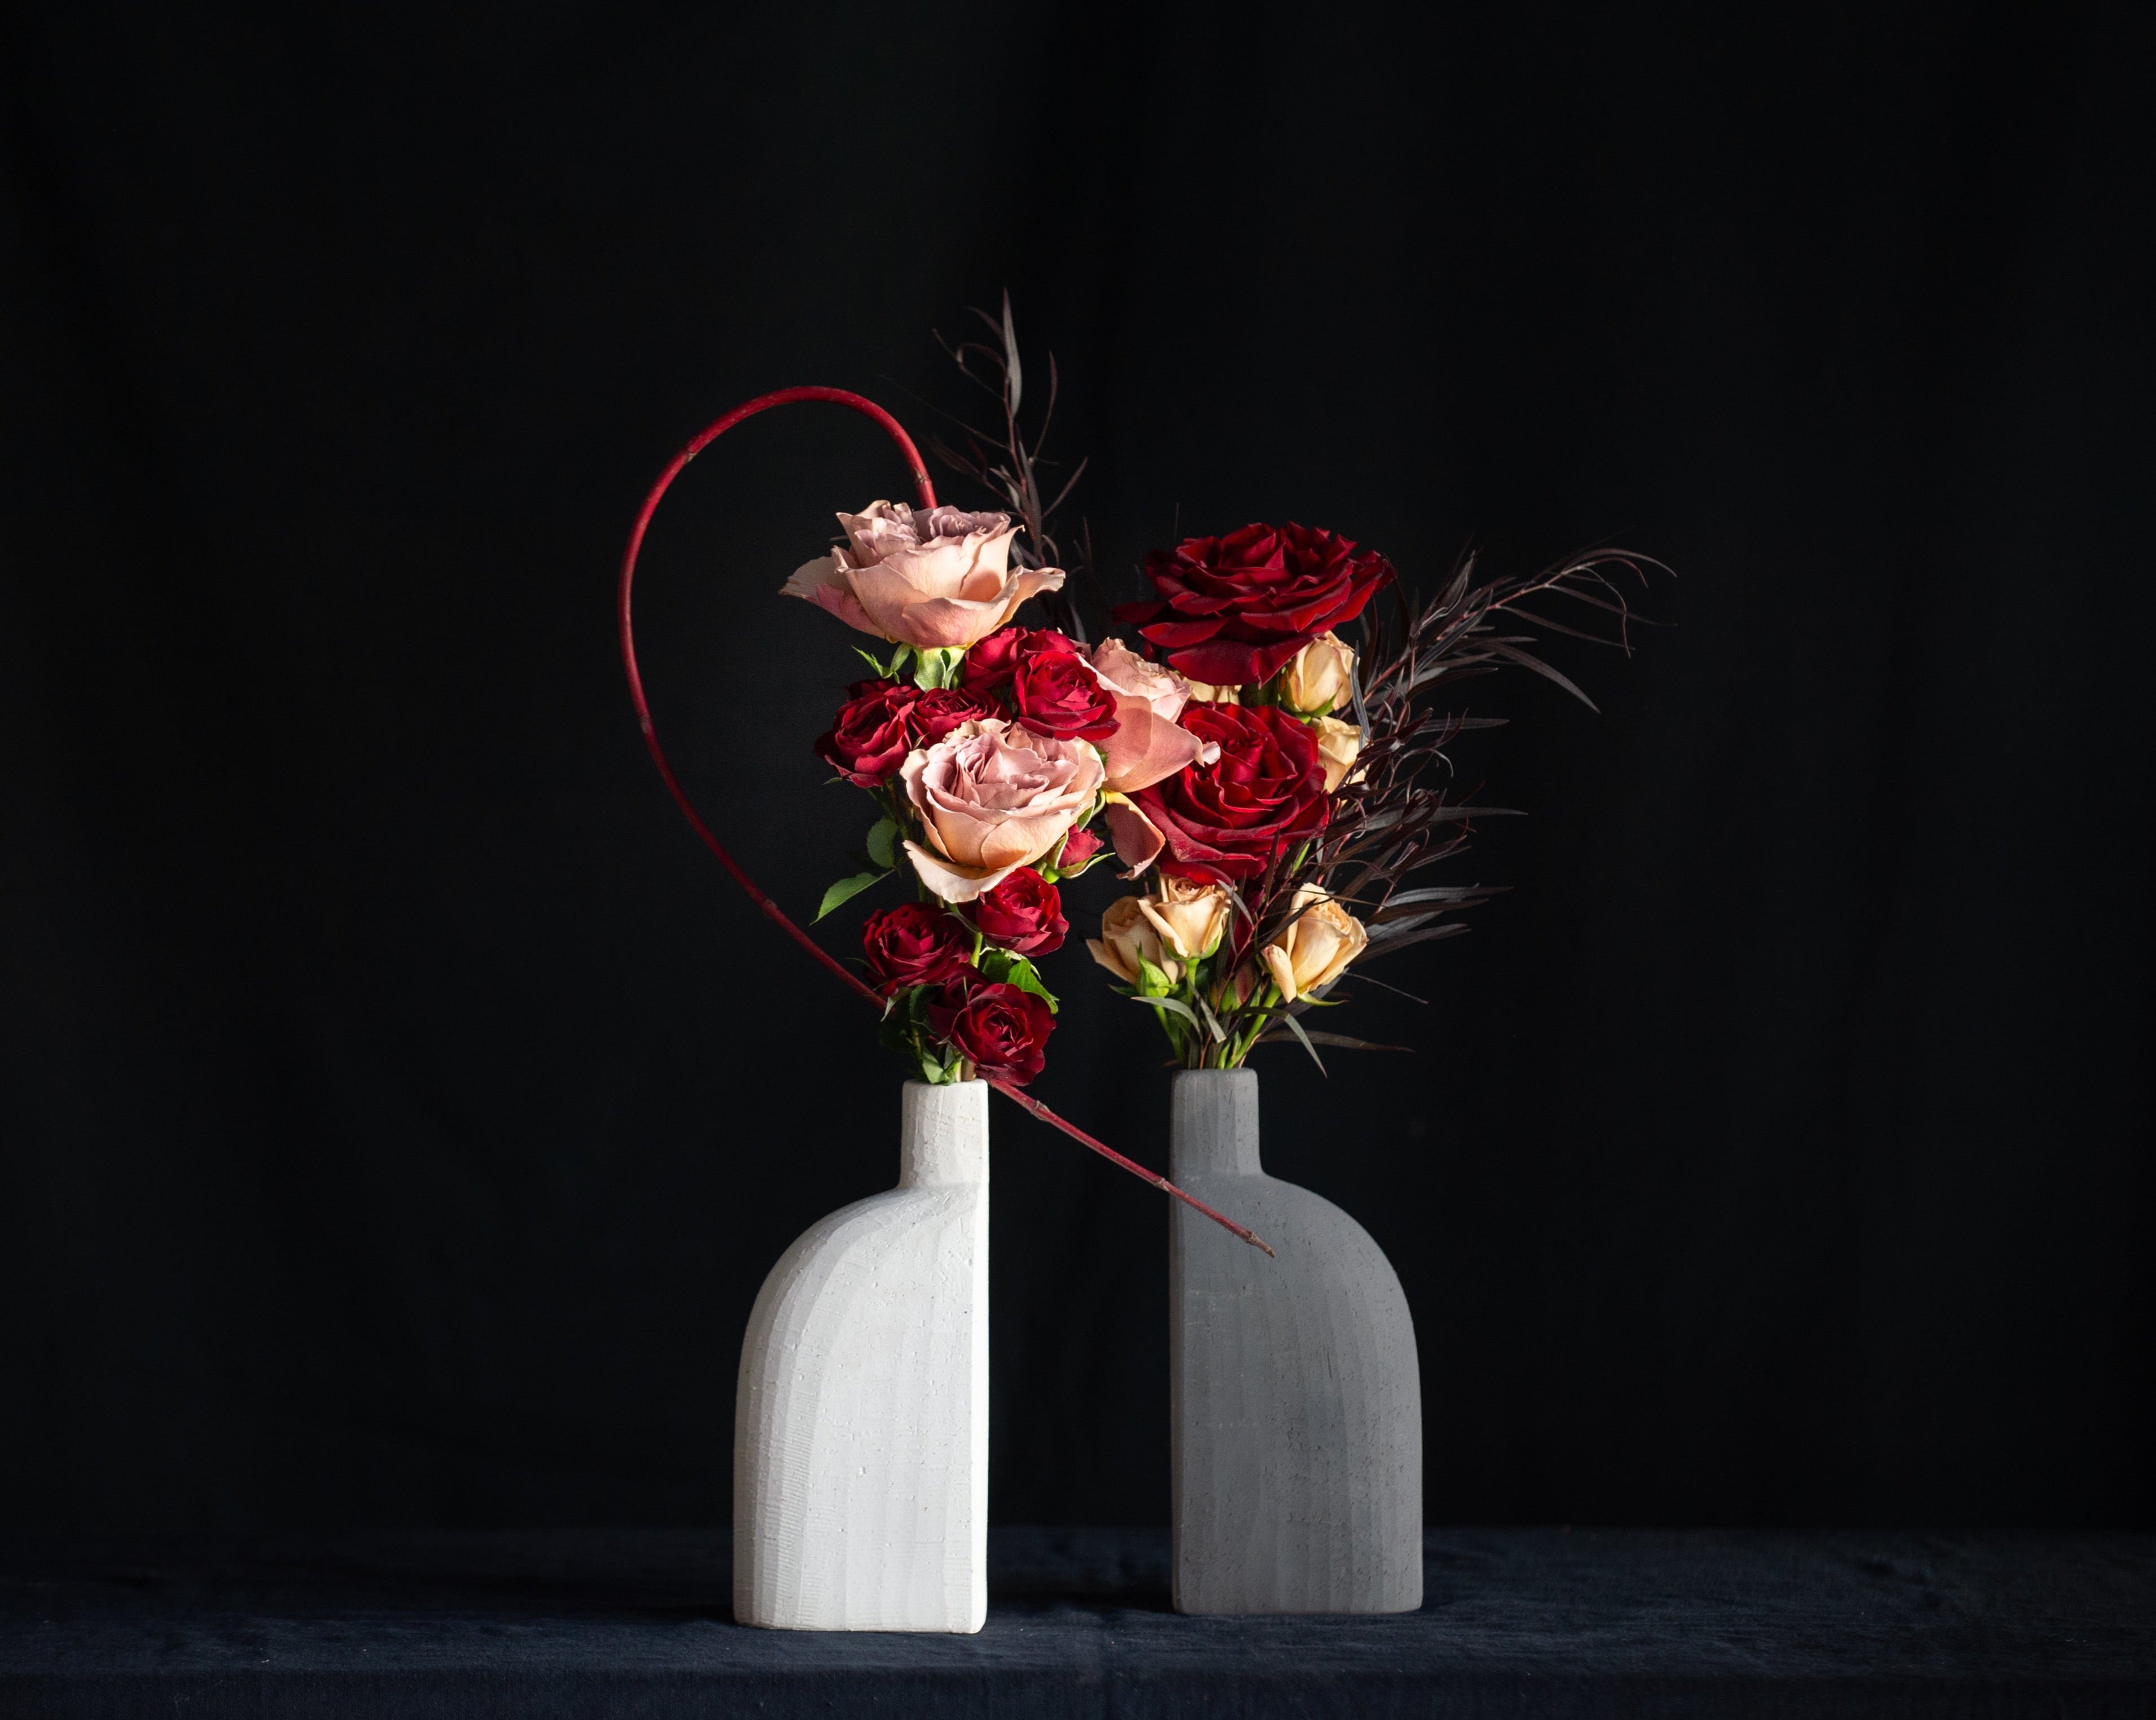 Bookend Bud Vases for your better half